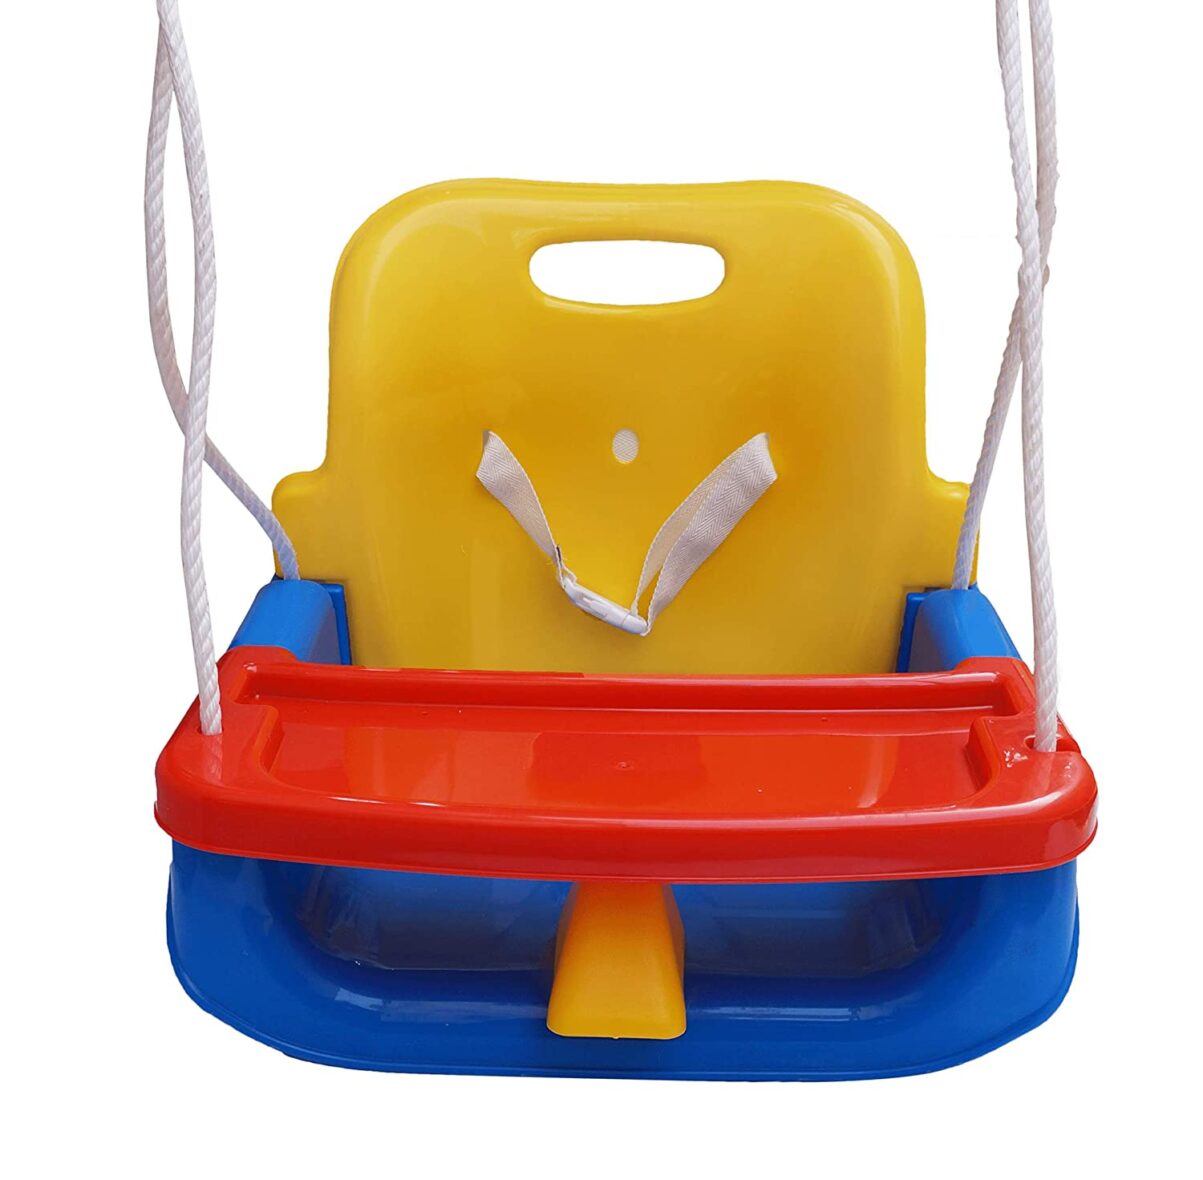 Swing for Kids – Baby Swing with Tray – for Indoor and Outdoor- Red and Blue Color – for Boys and Girls of Age 6 Months +